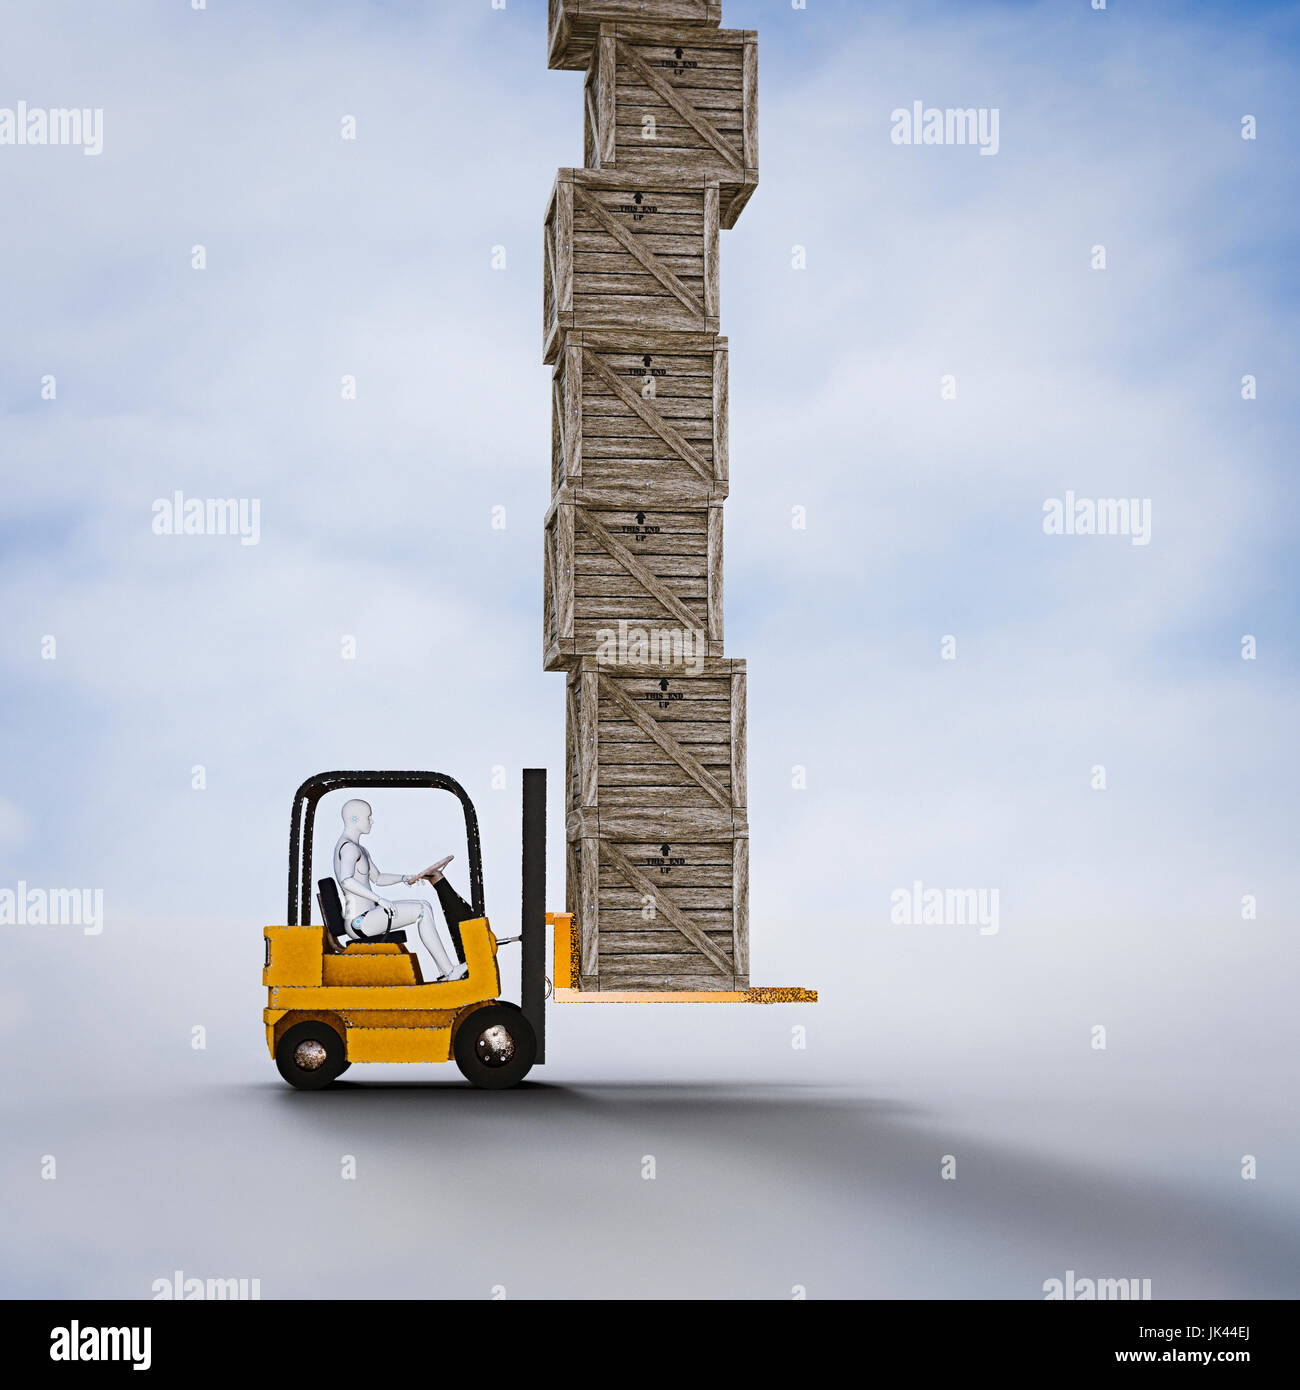 Robot driving forklift carrying tall pile of wooden crates Stock Photo